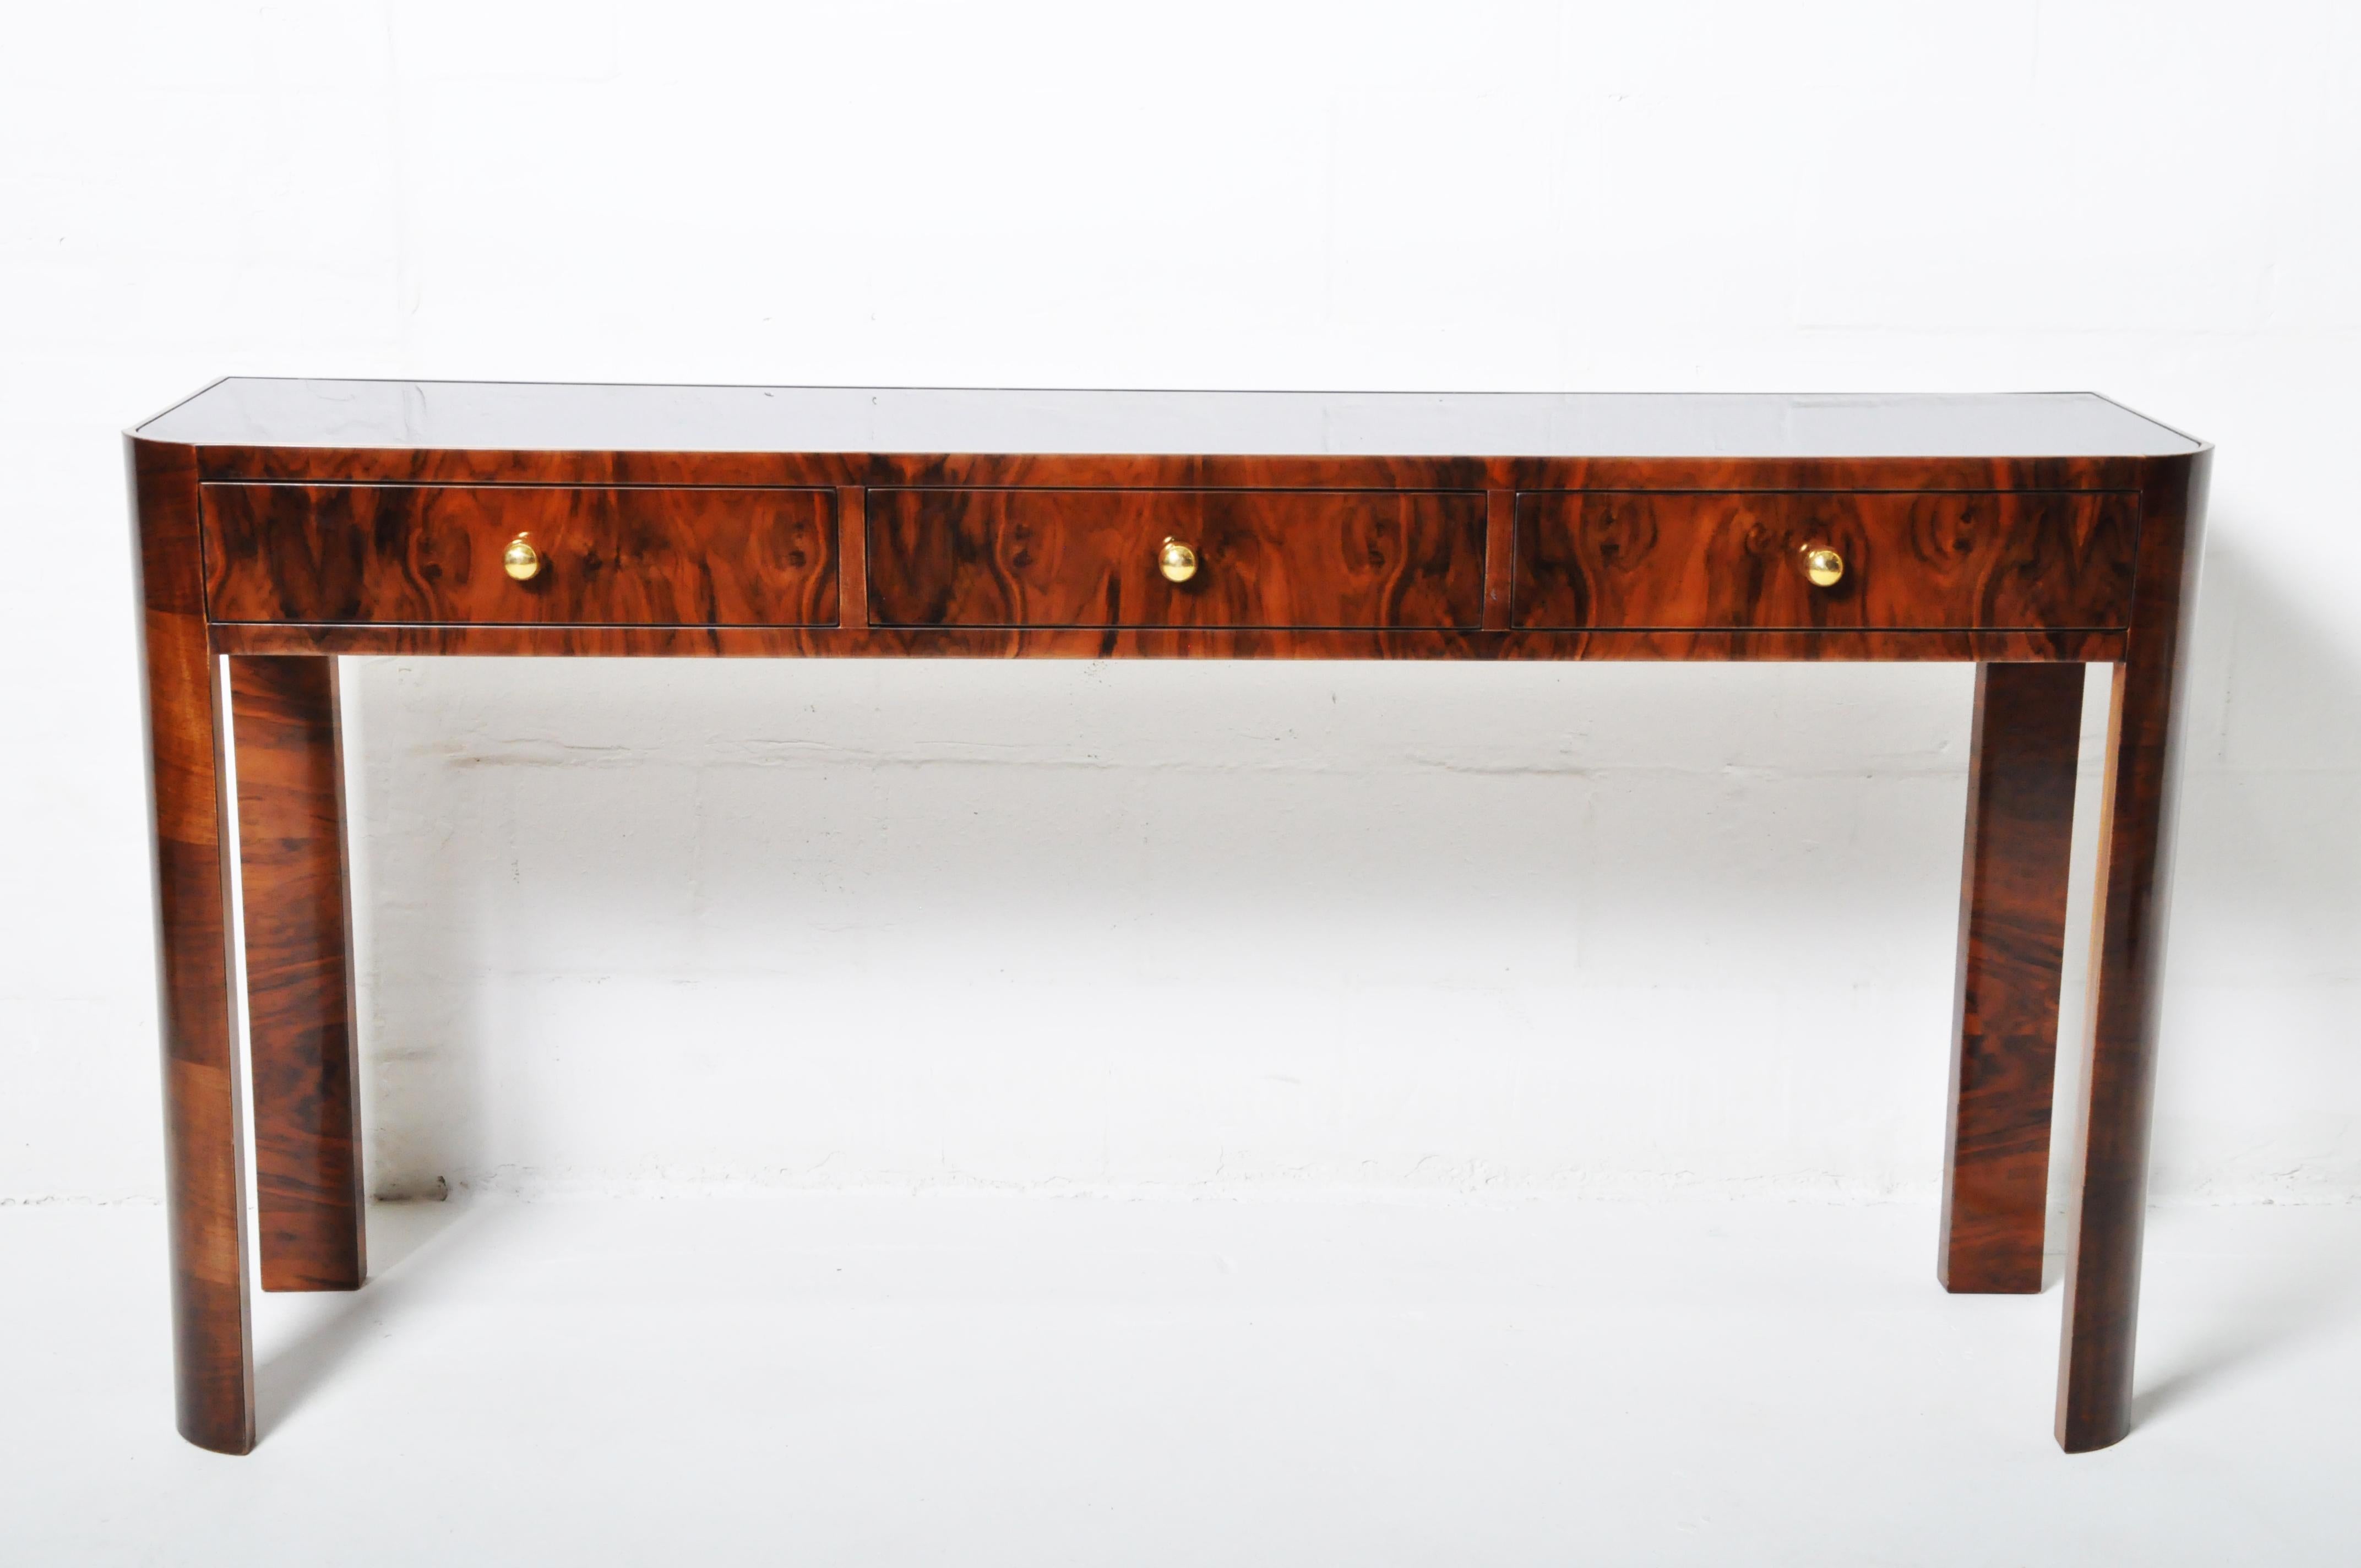 Hungarian Console Table with Three Drawers and a Black Glass Top